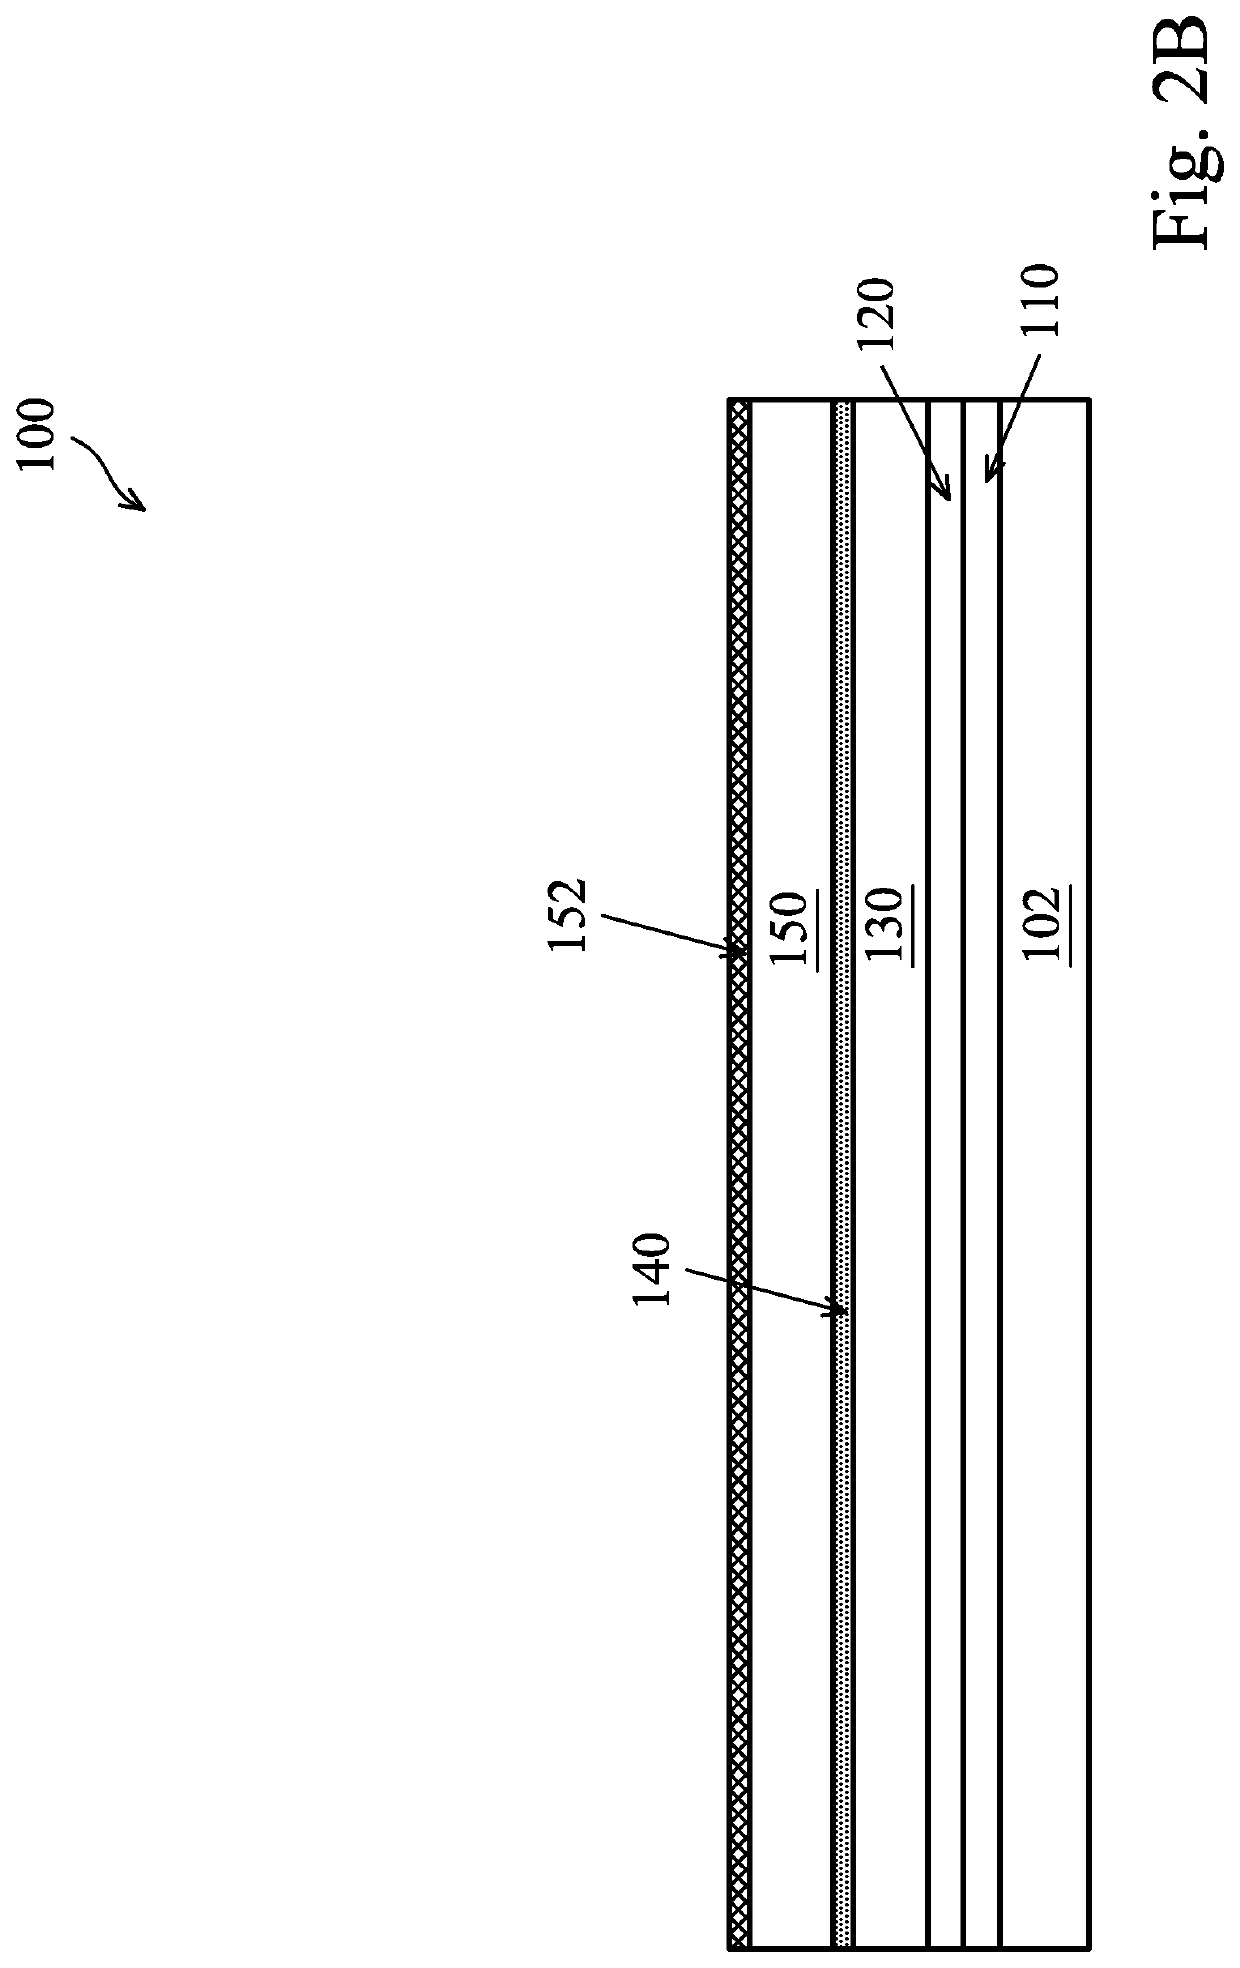 Multi-Layer Passivation Structure and Method